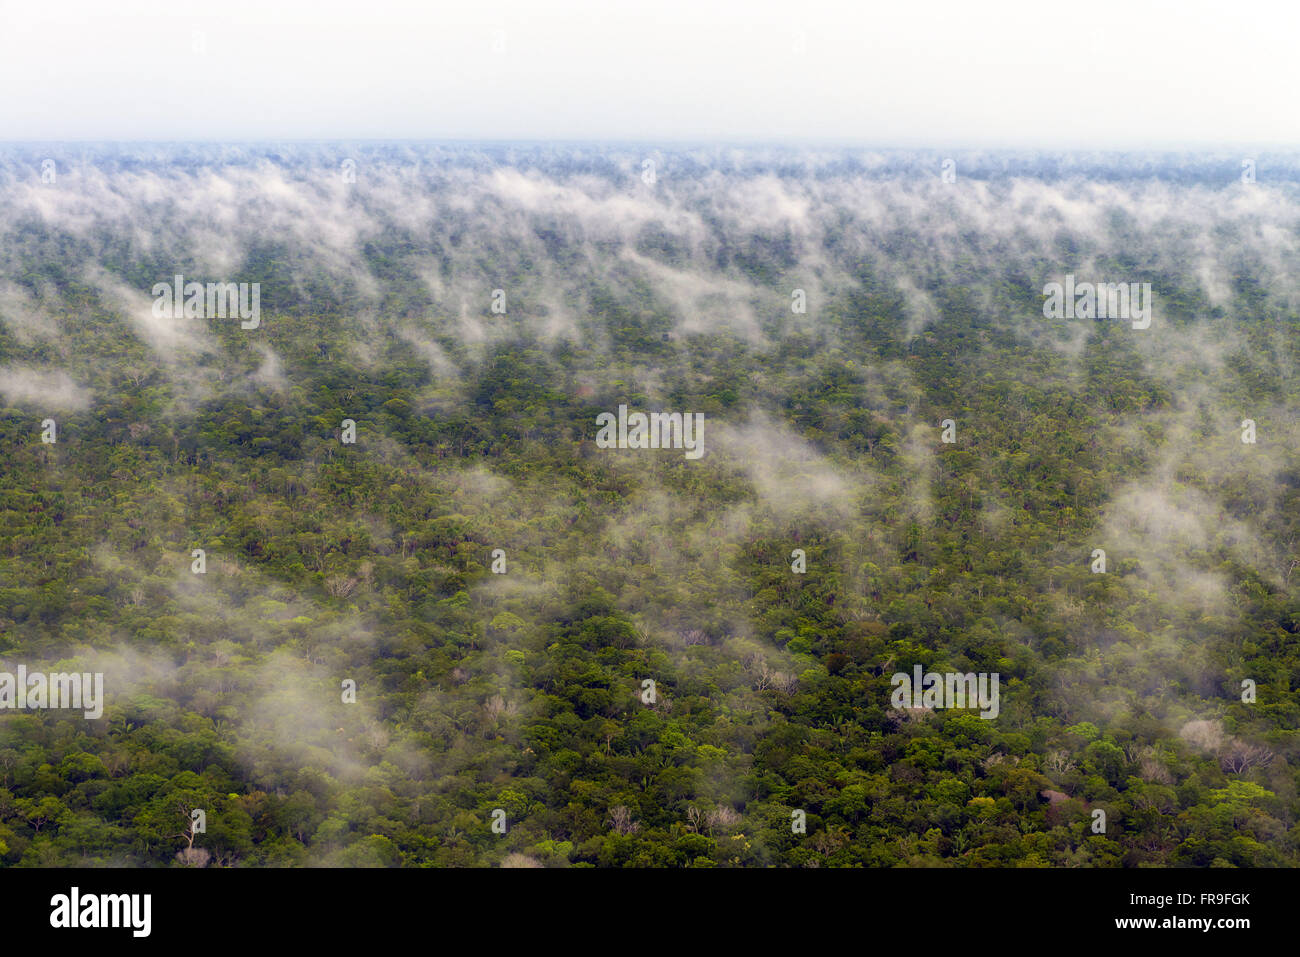 Aerial view of the water cycle evaporation phase after rain forest in the Amazon Stock Photo